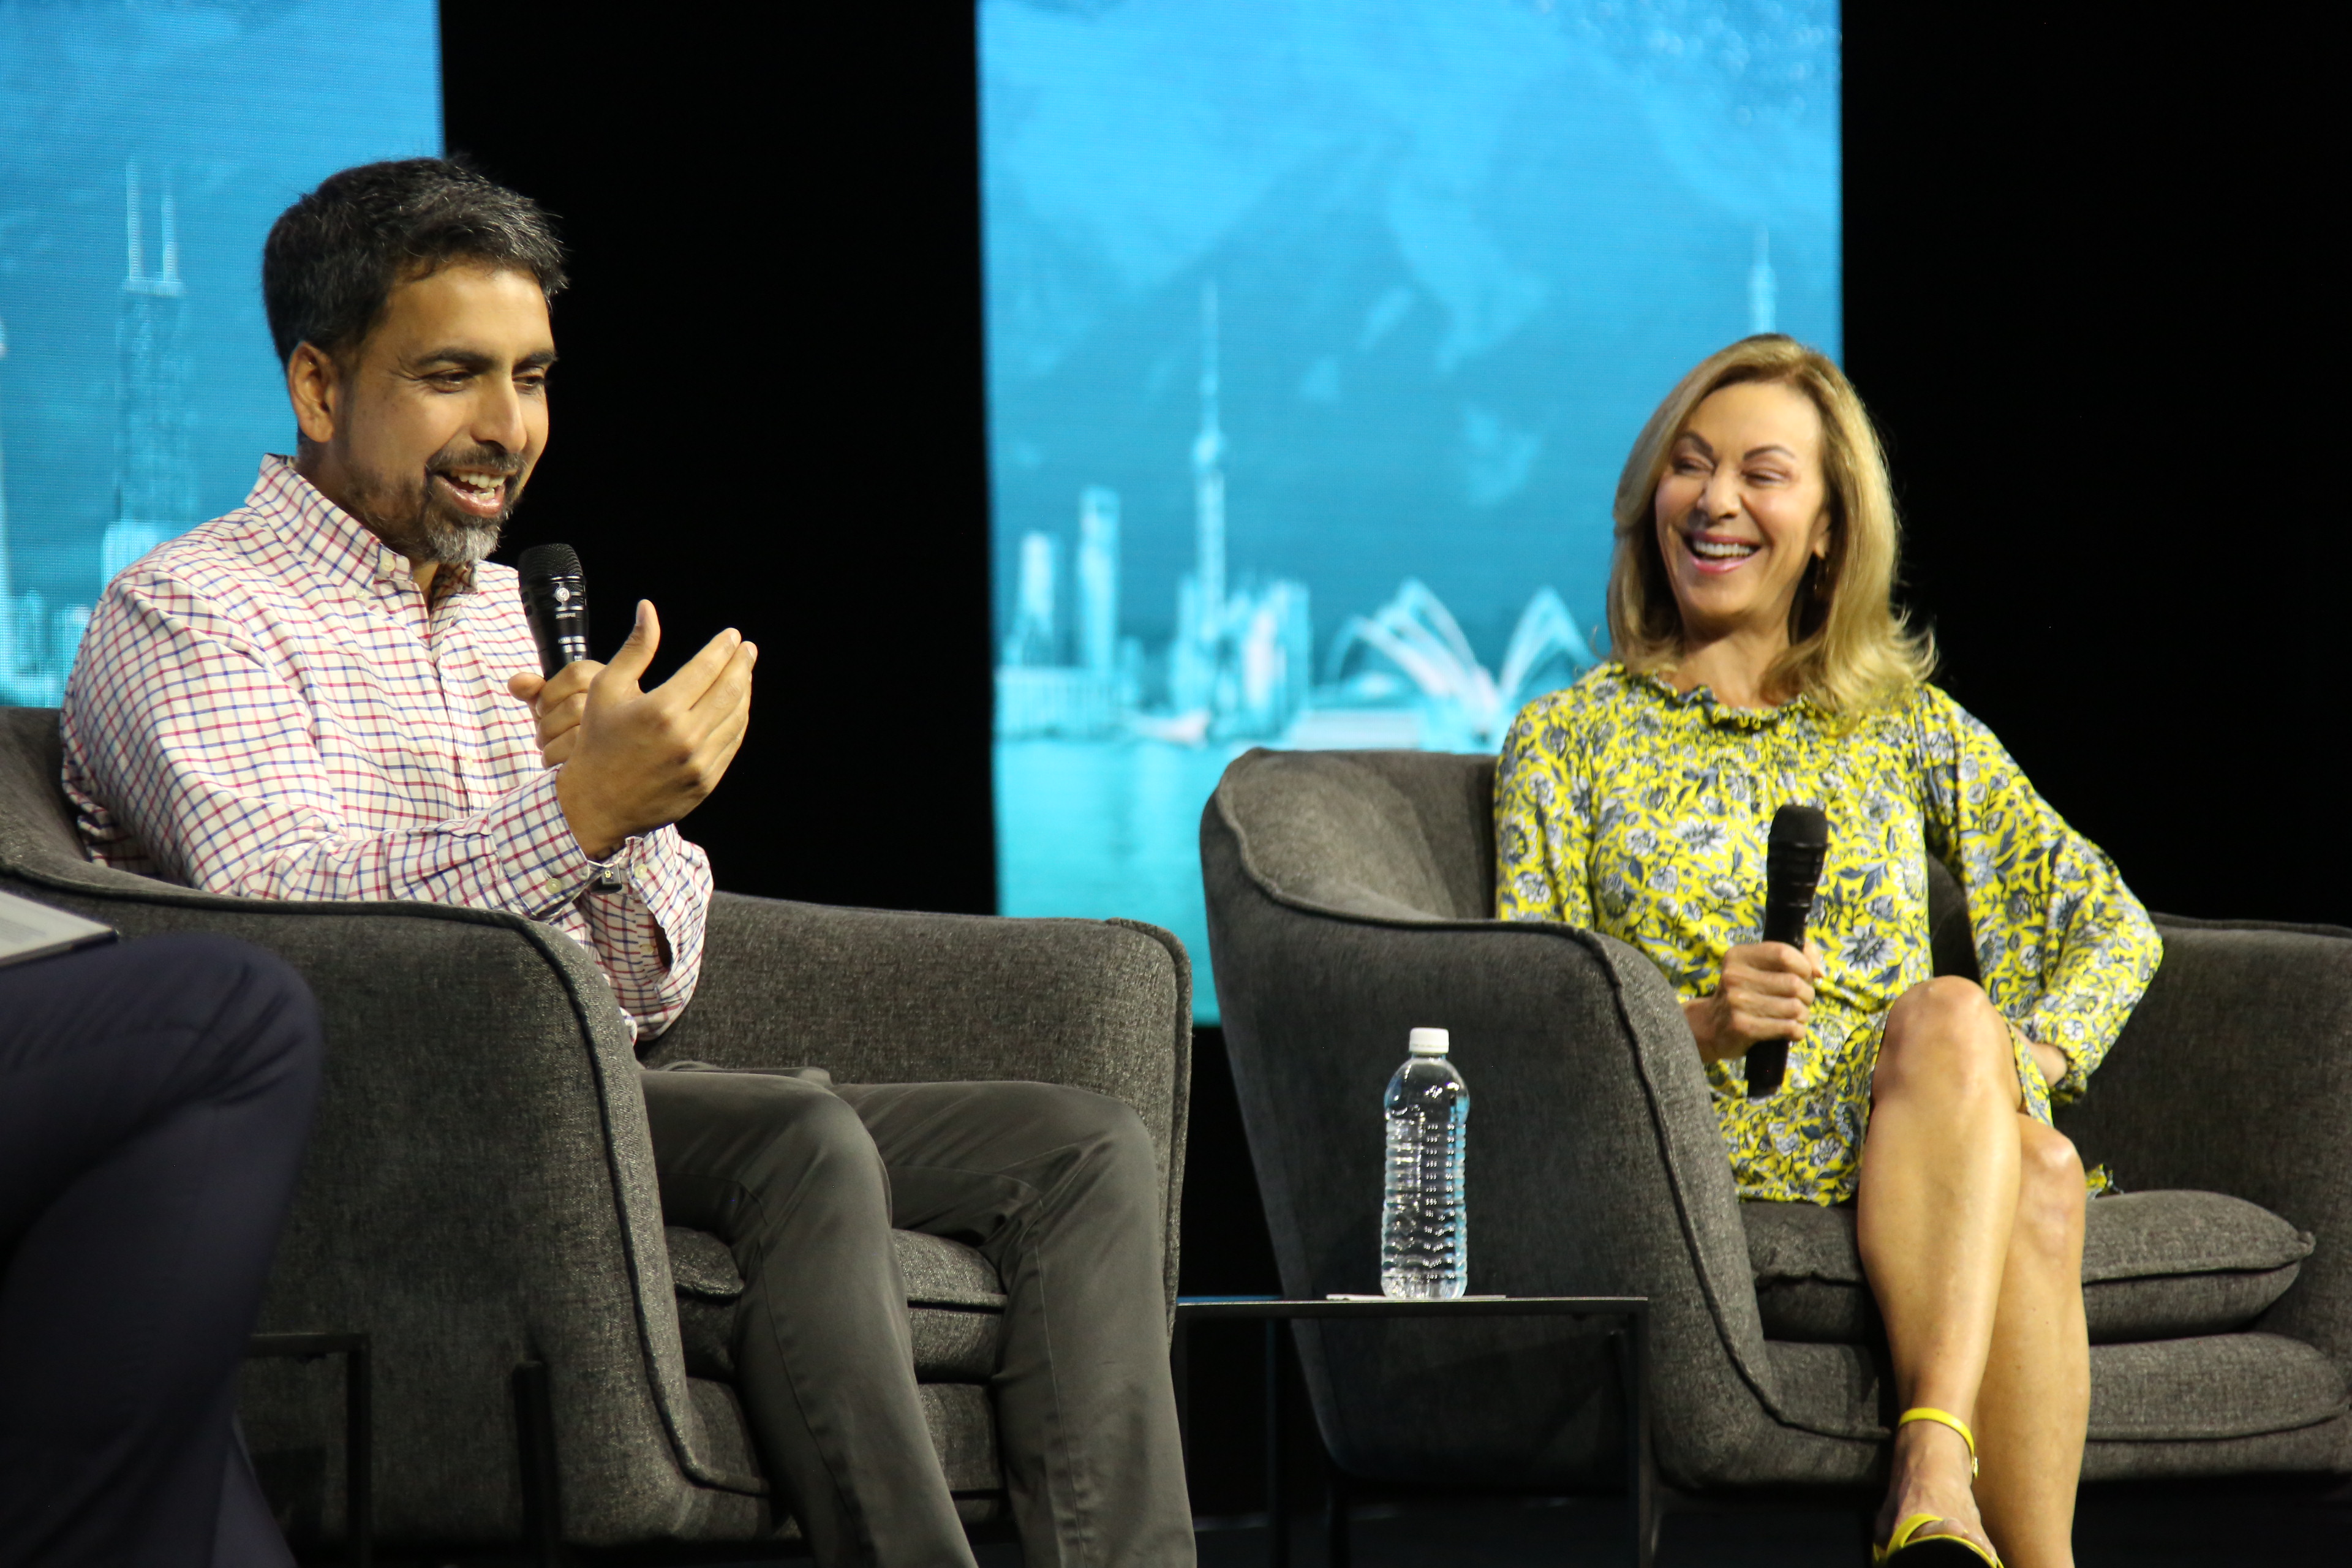 Two people smiling and talking on stage during panel